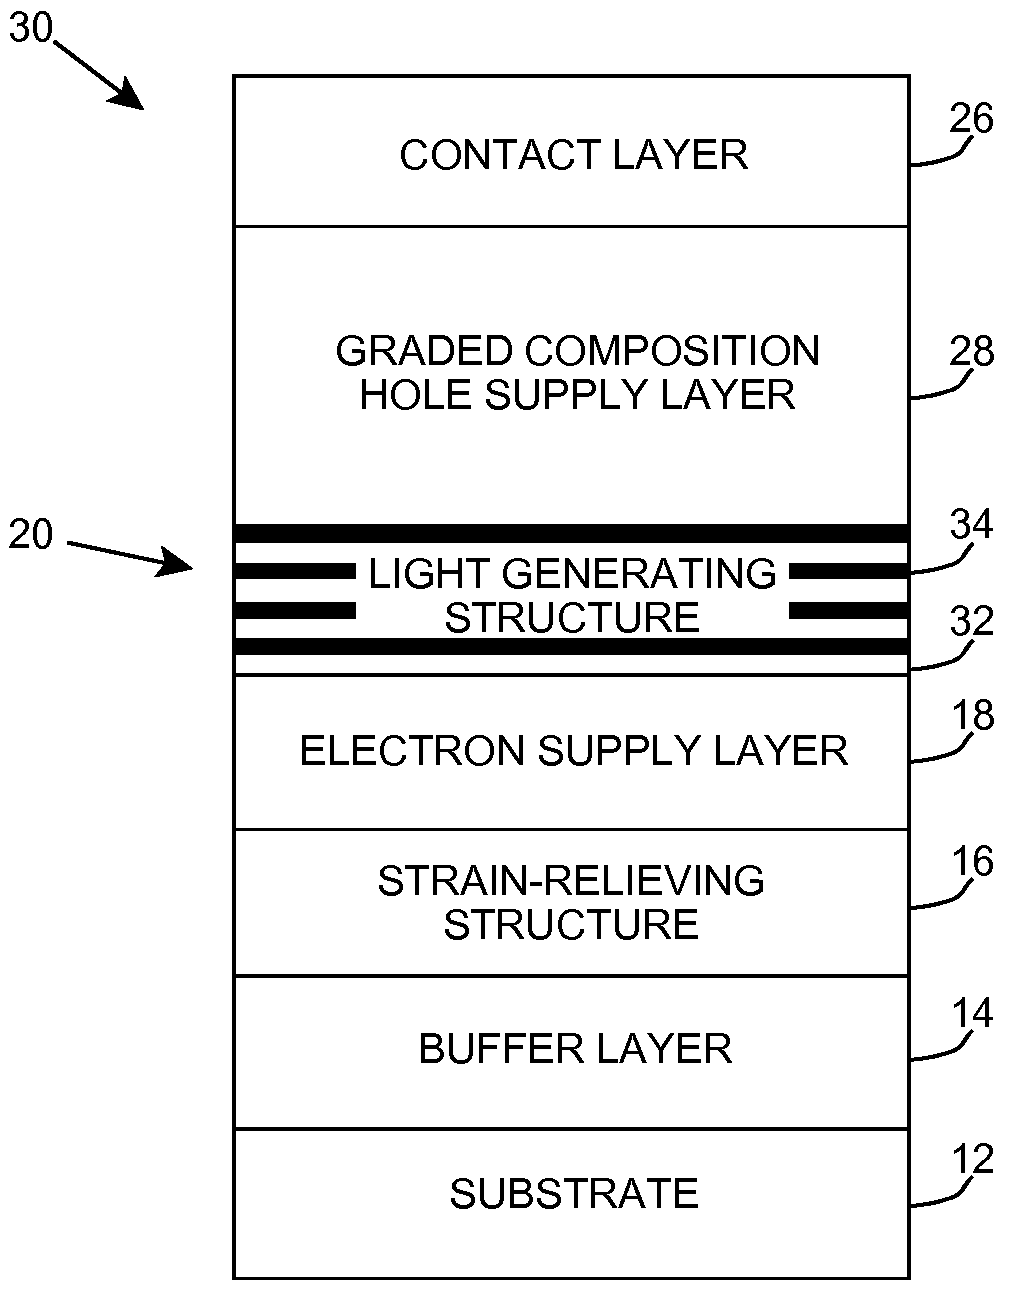 Heterostructure including light generating structure contained in potential well